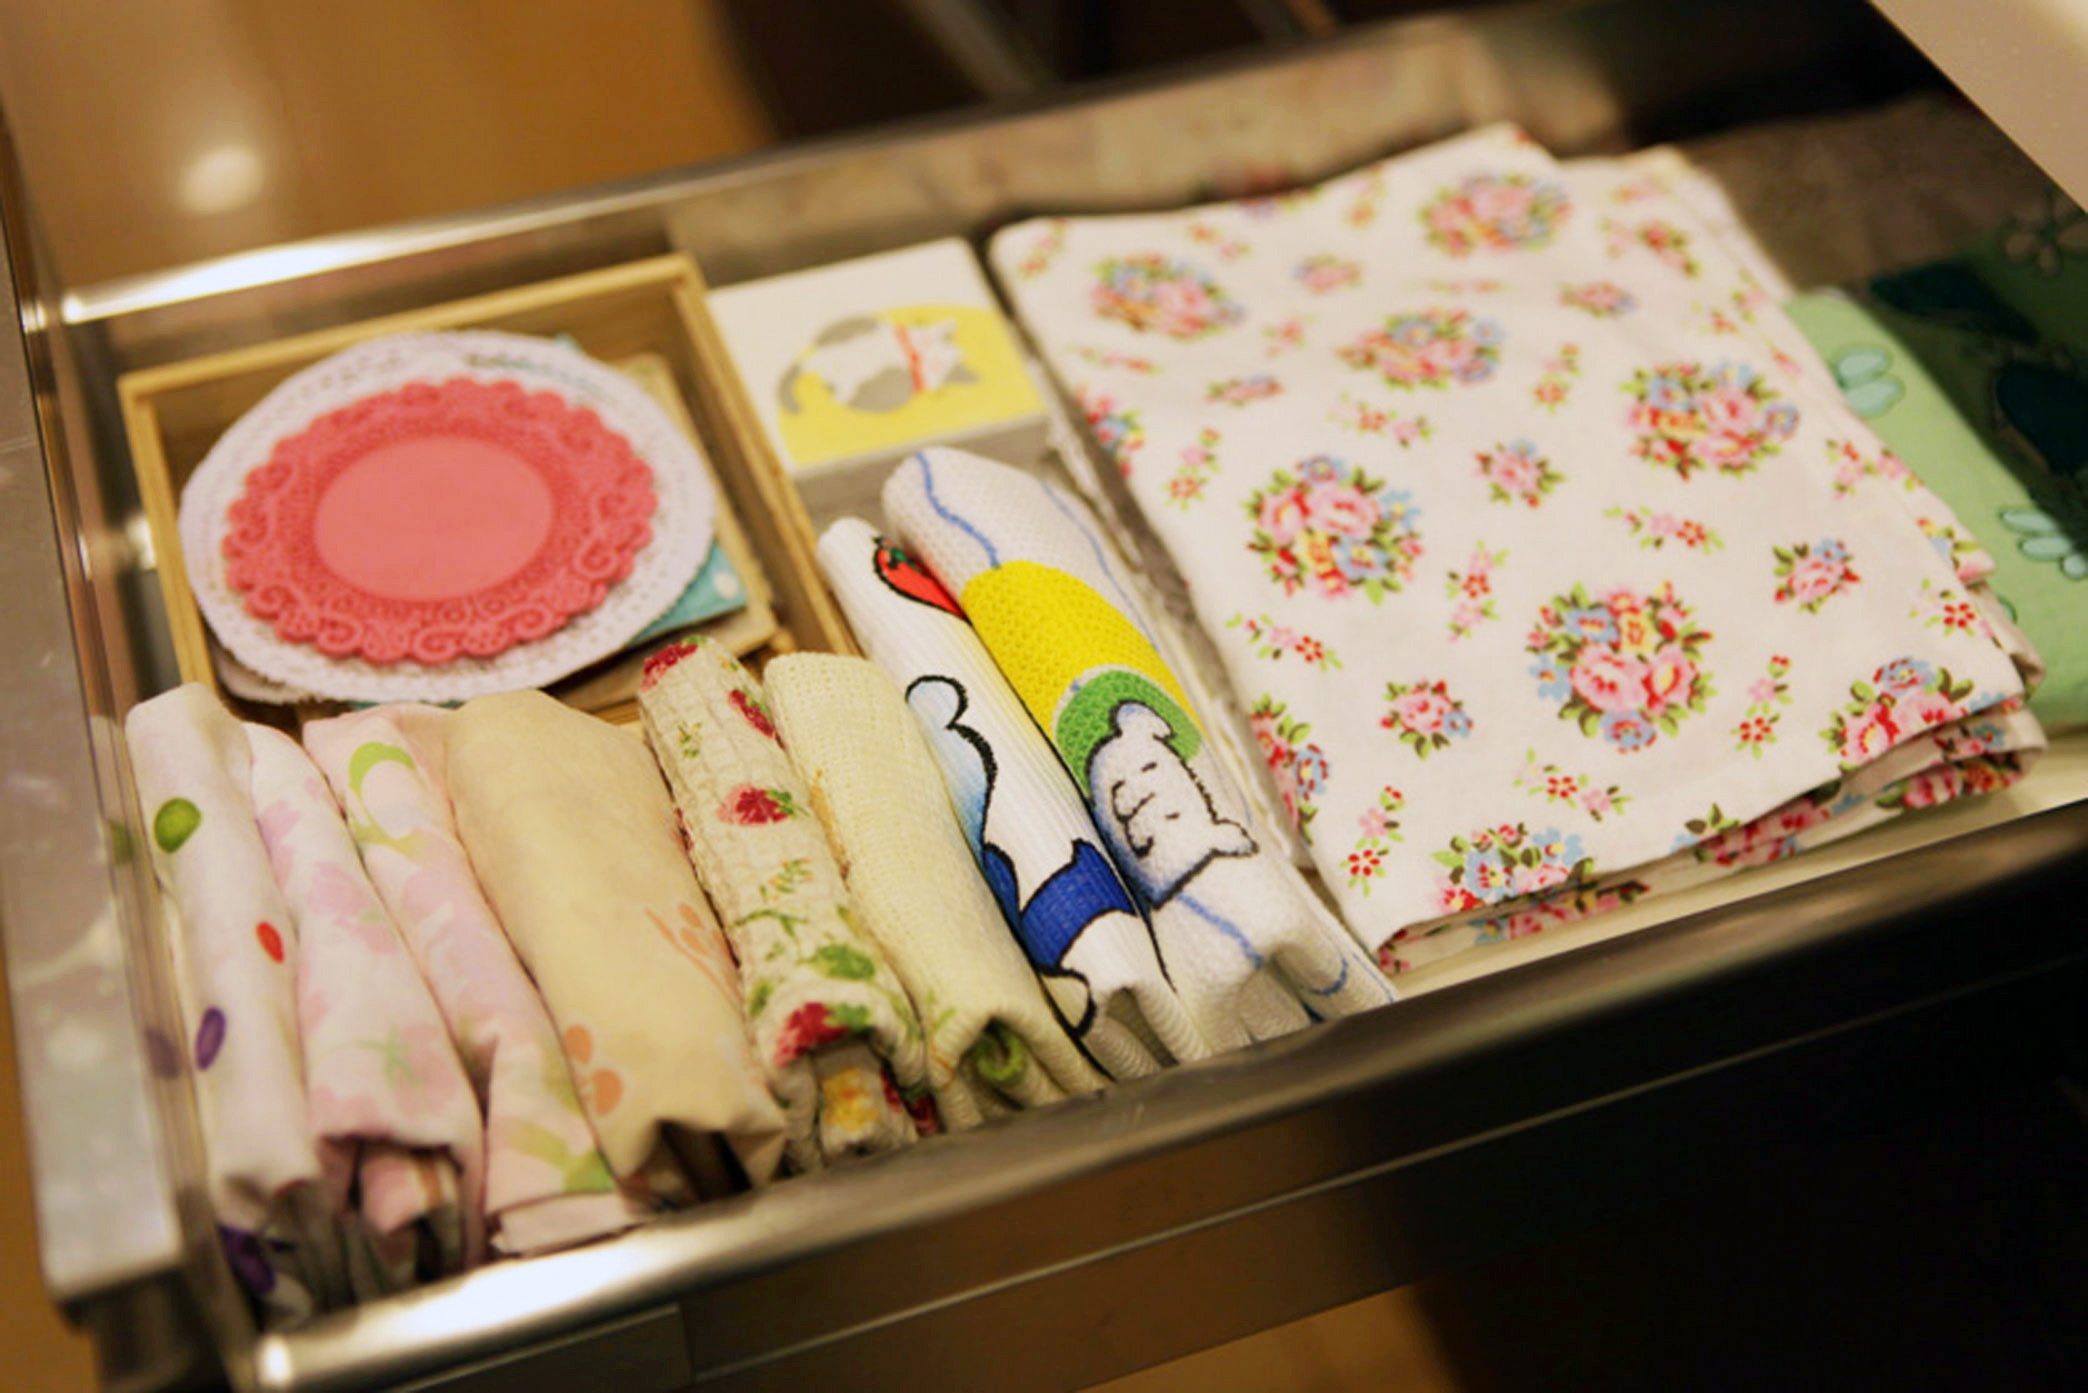 Linen items are neatly folded in a drawer.